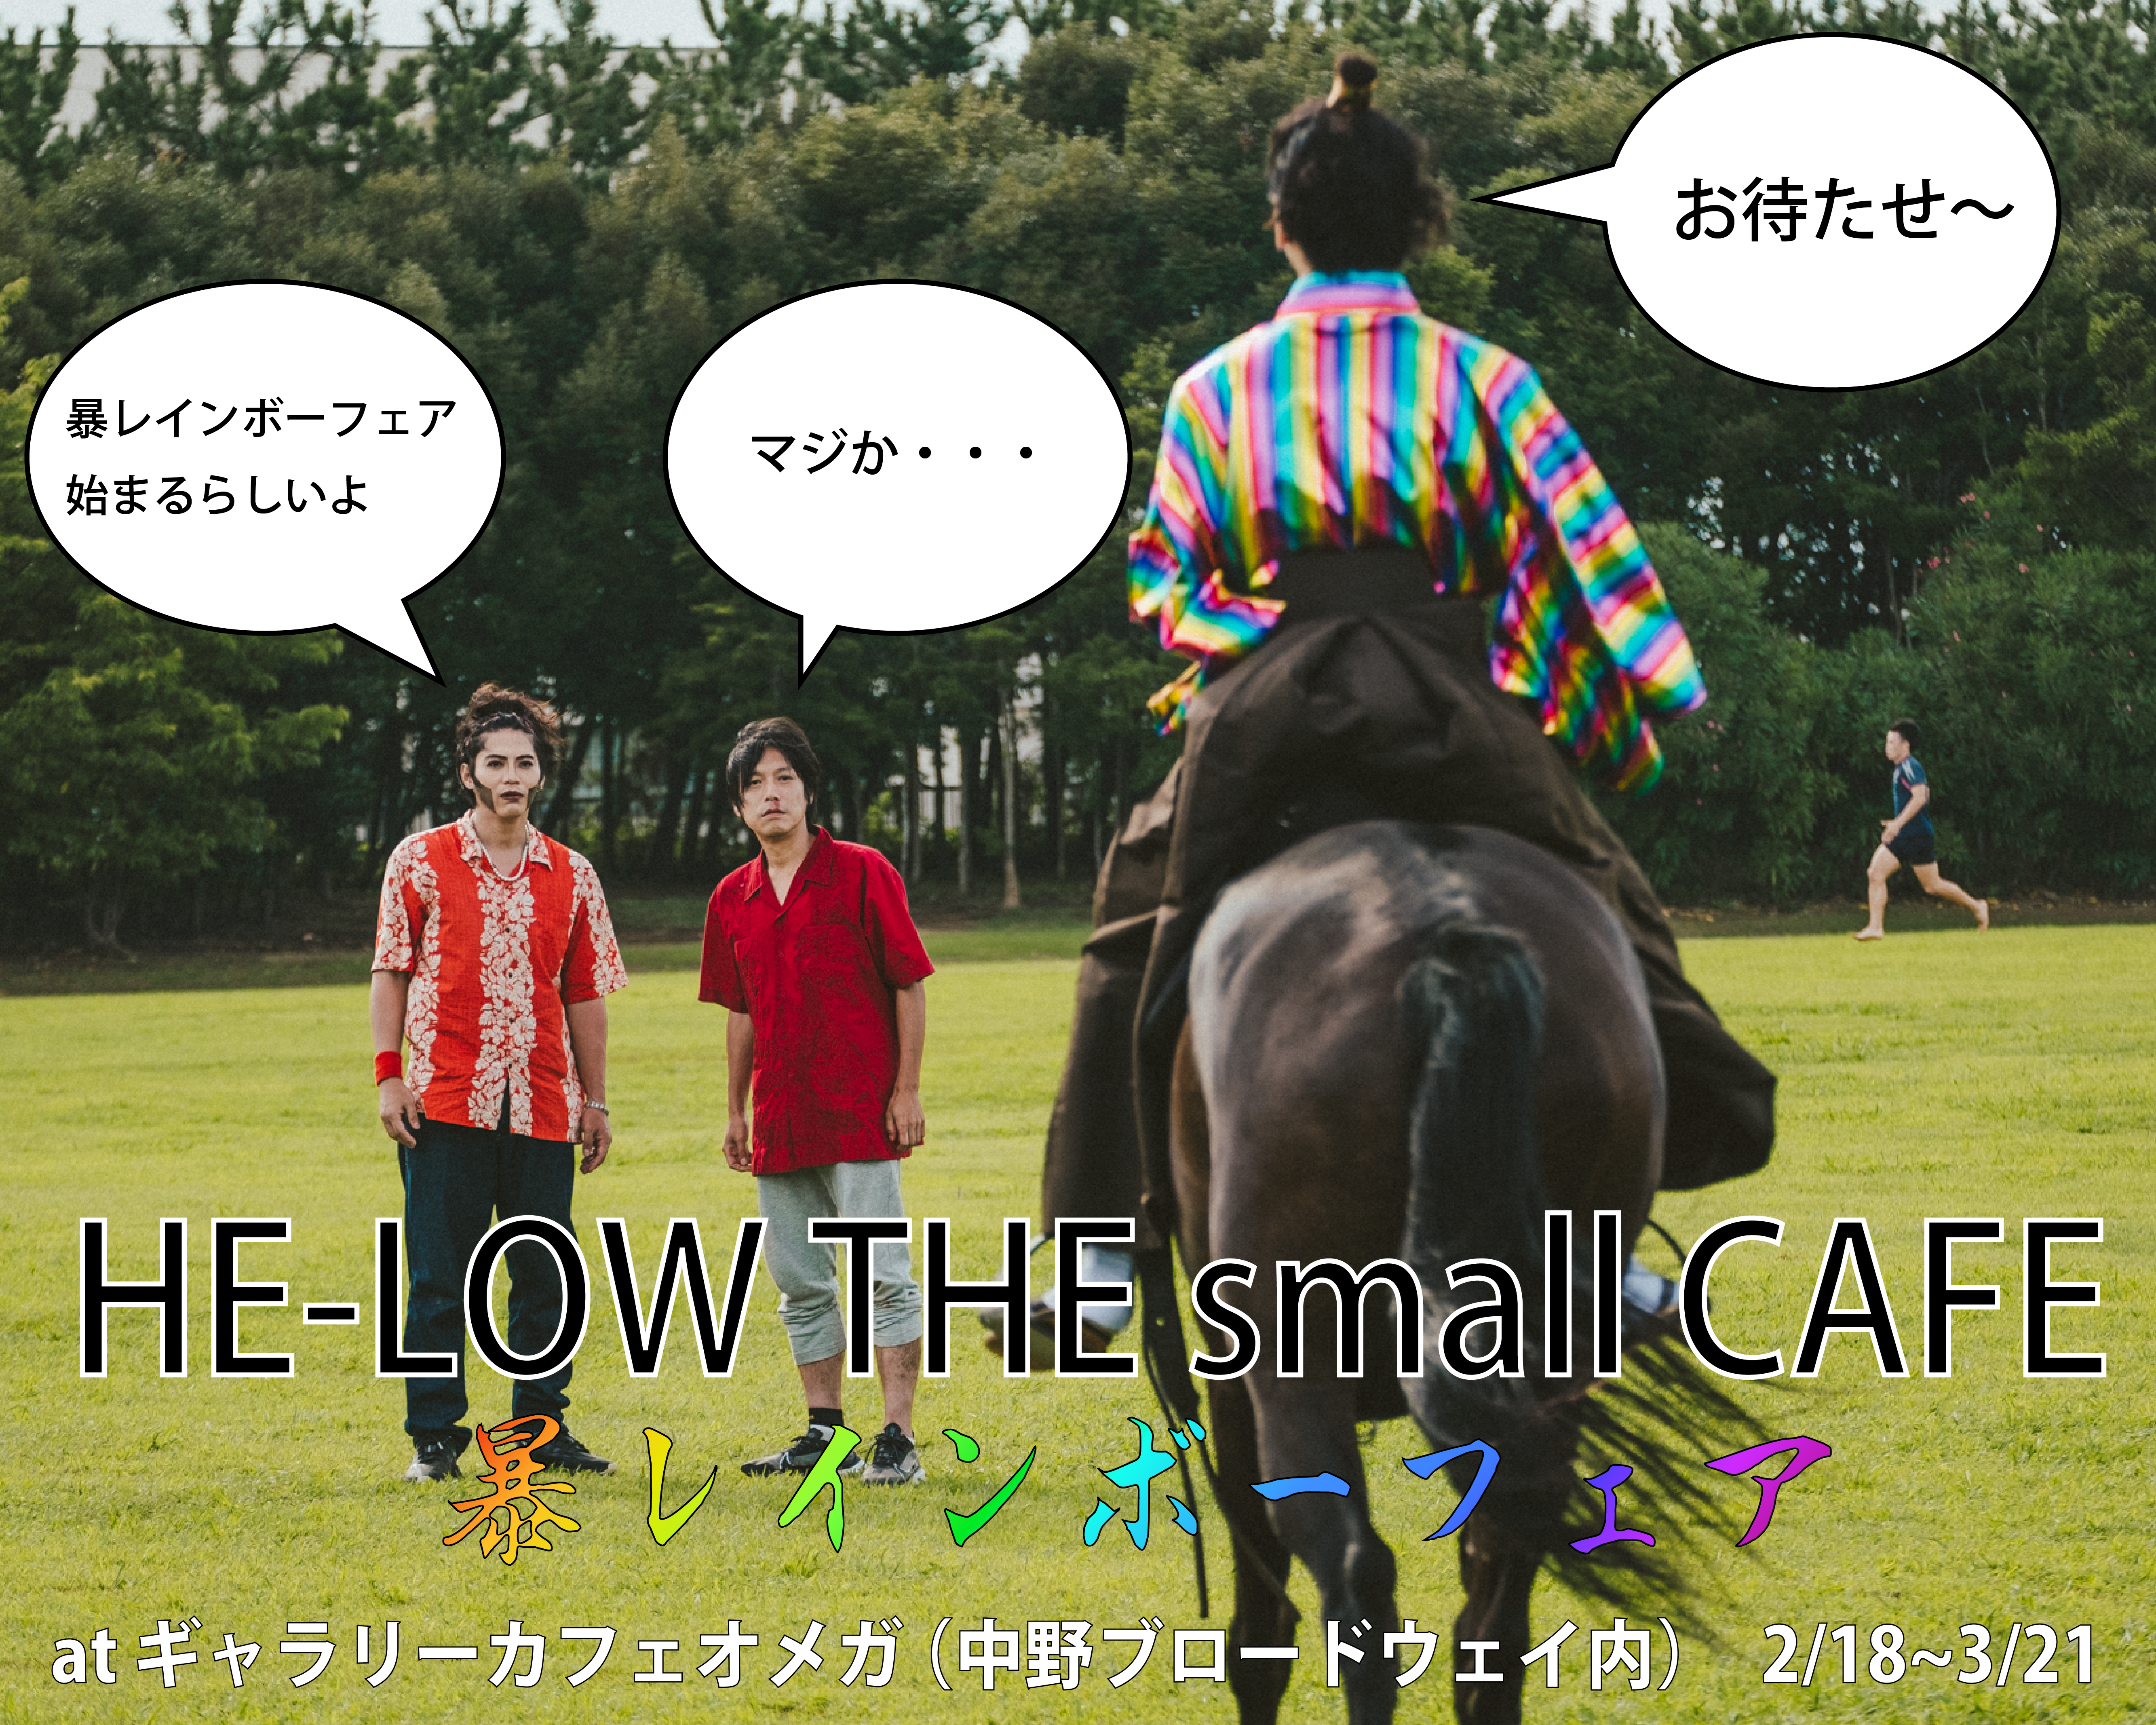 HE-LOW THE small CAFE ～暴レインボーフェア～